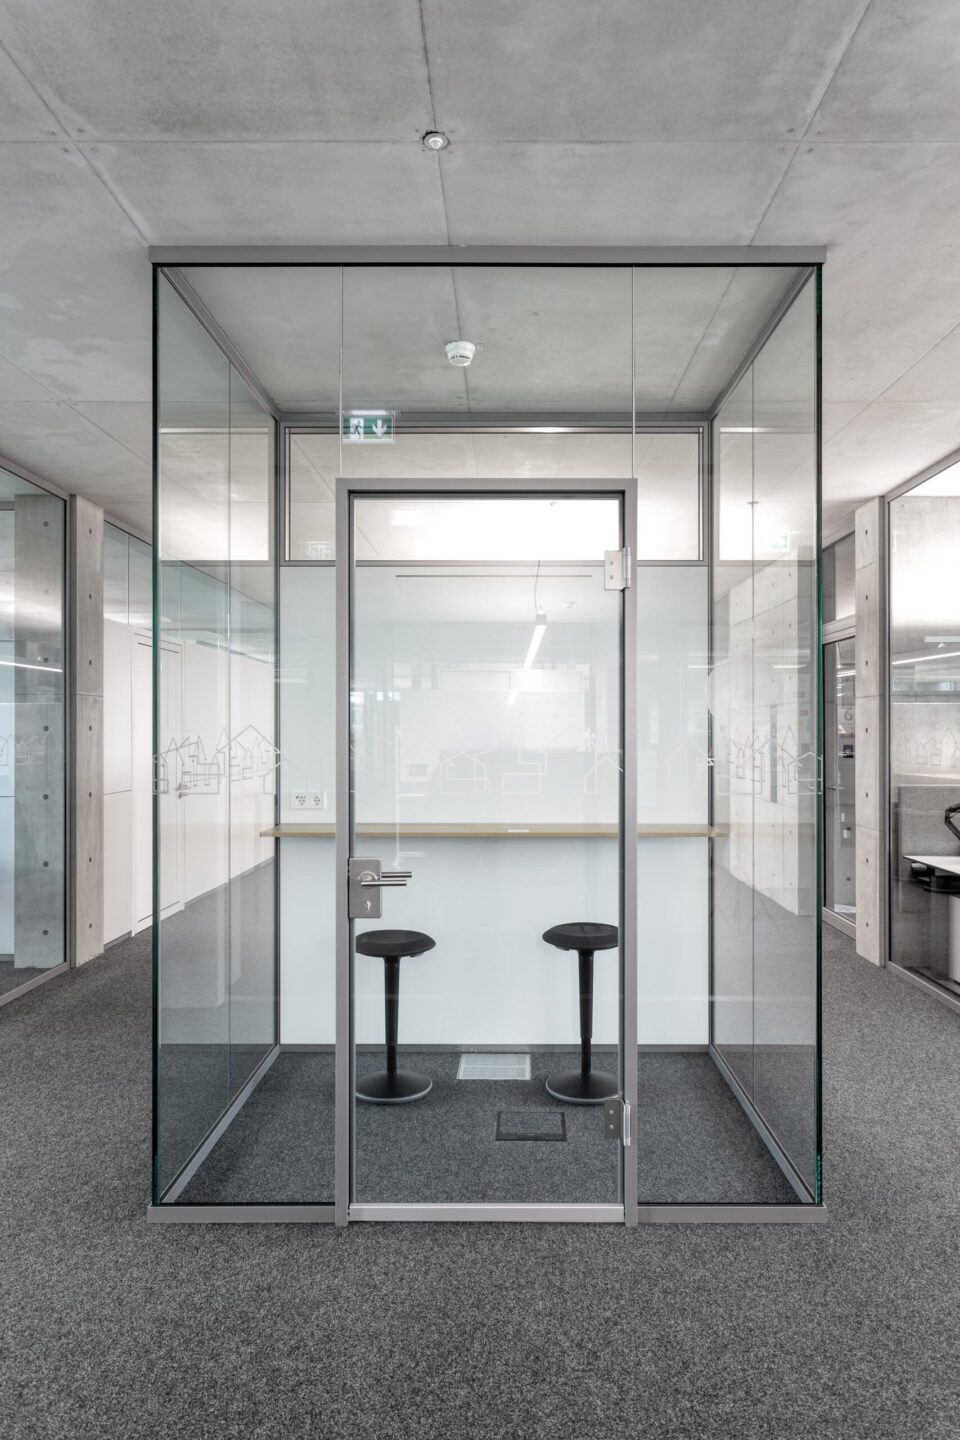 weisenburger Karlsruhe │ conference rooms │ fecoplan all-glass construction